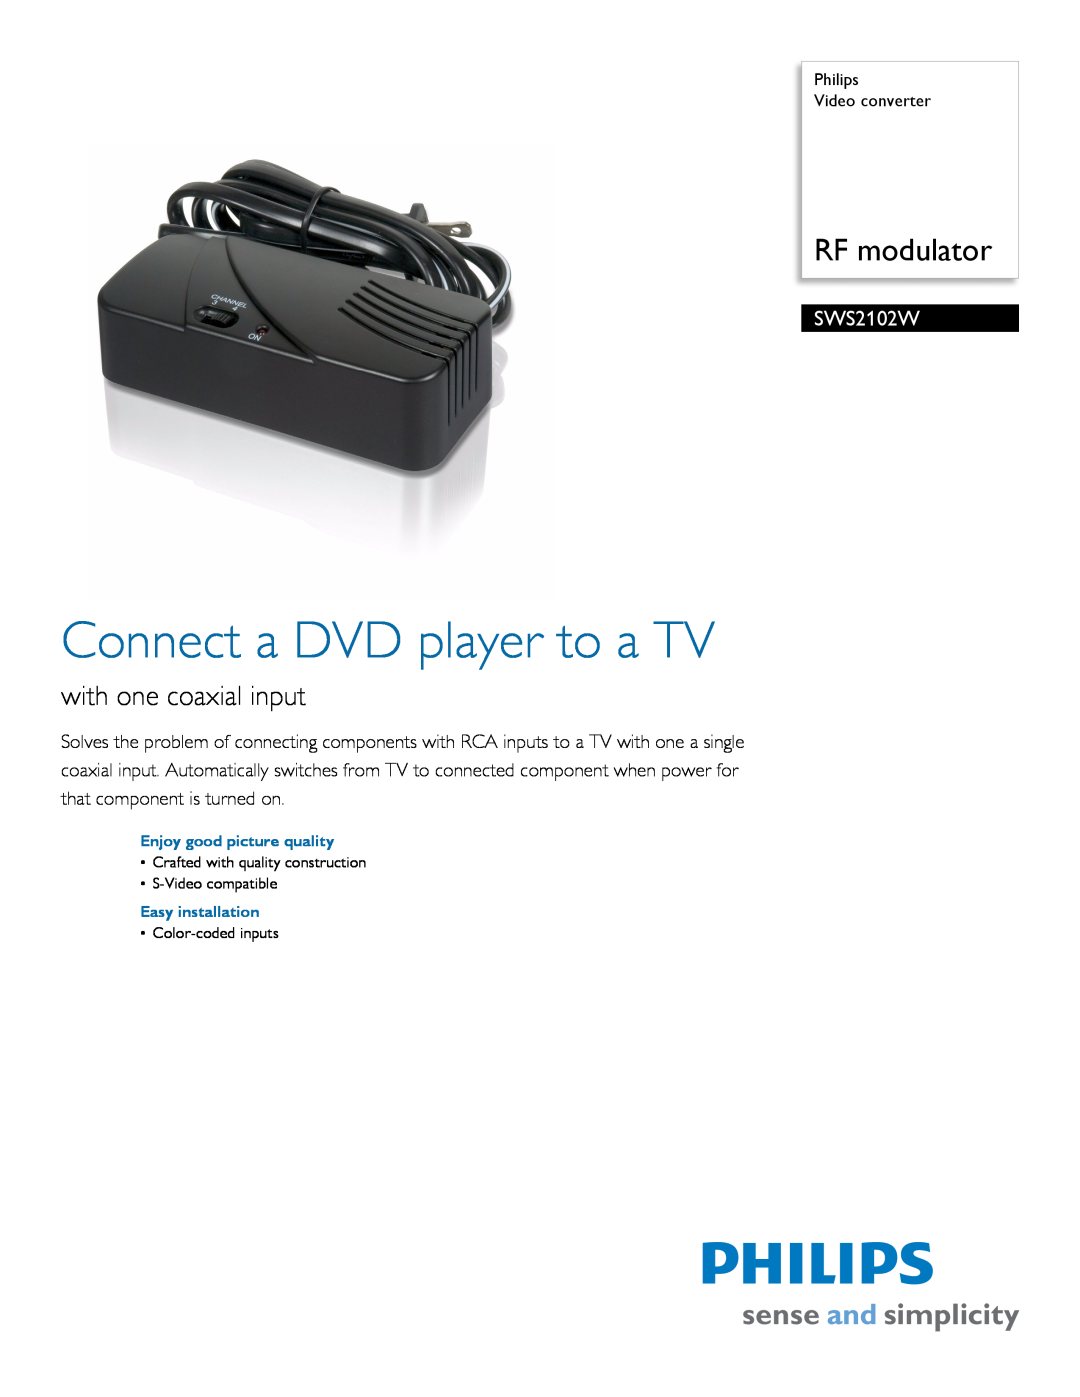 Philips SWS2102W manual Philips Video converter, Enjoy good picture quality, Easy installation, RF modulator 